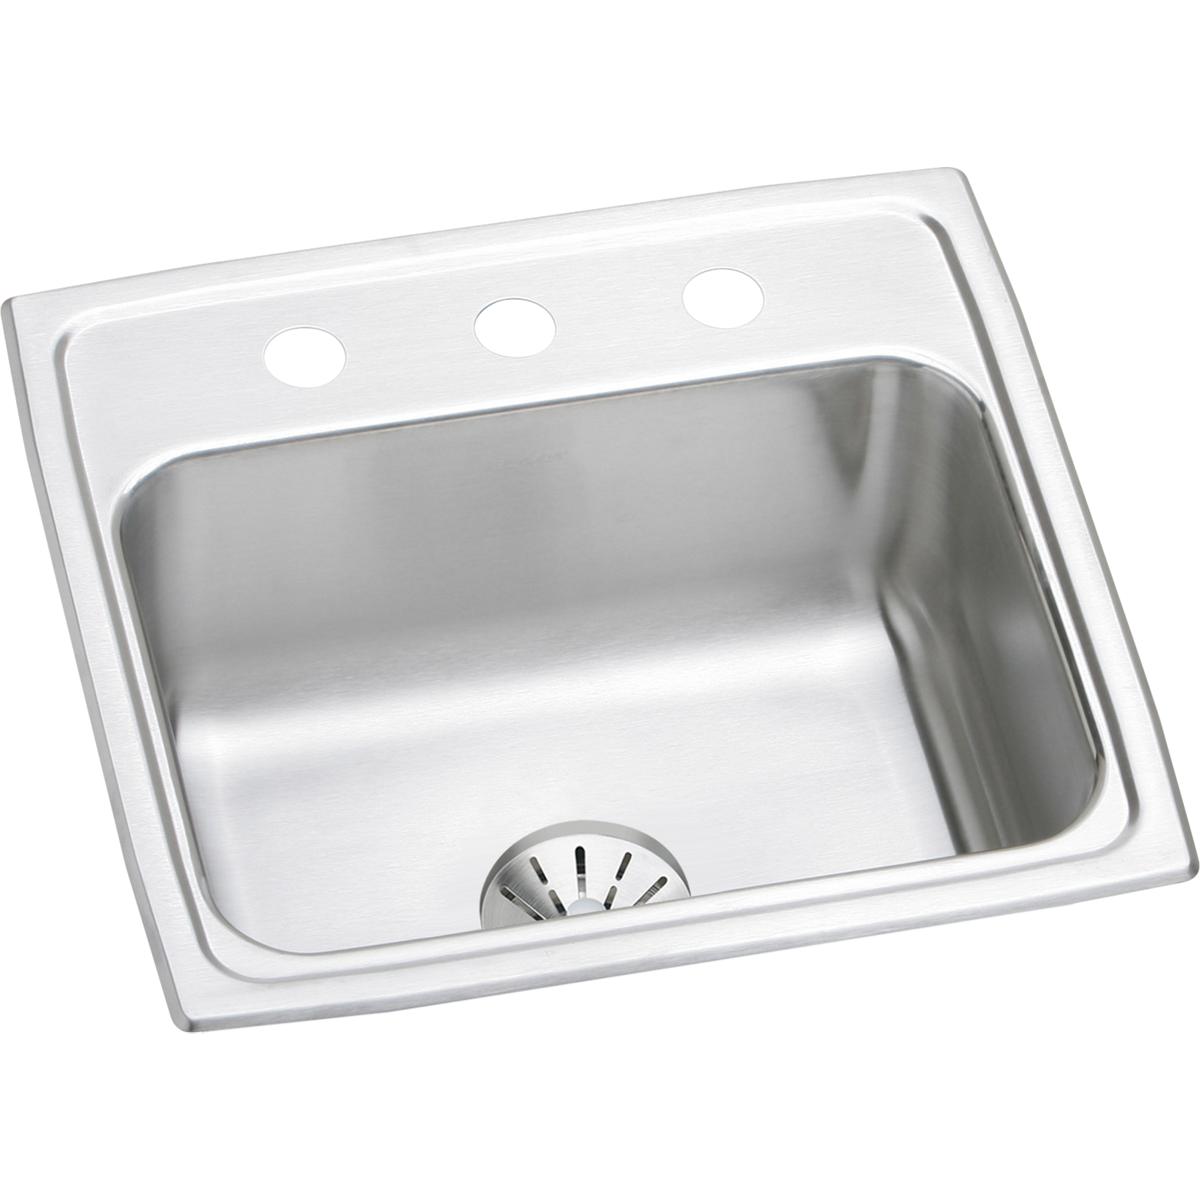 Elkay Lustertone Classic 19-1/2" x 19" x 7-1/2" Single Bowl Stainless Steel Drop-in Sink with Perfect Drain